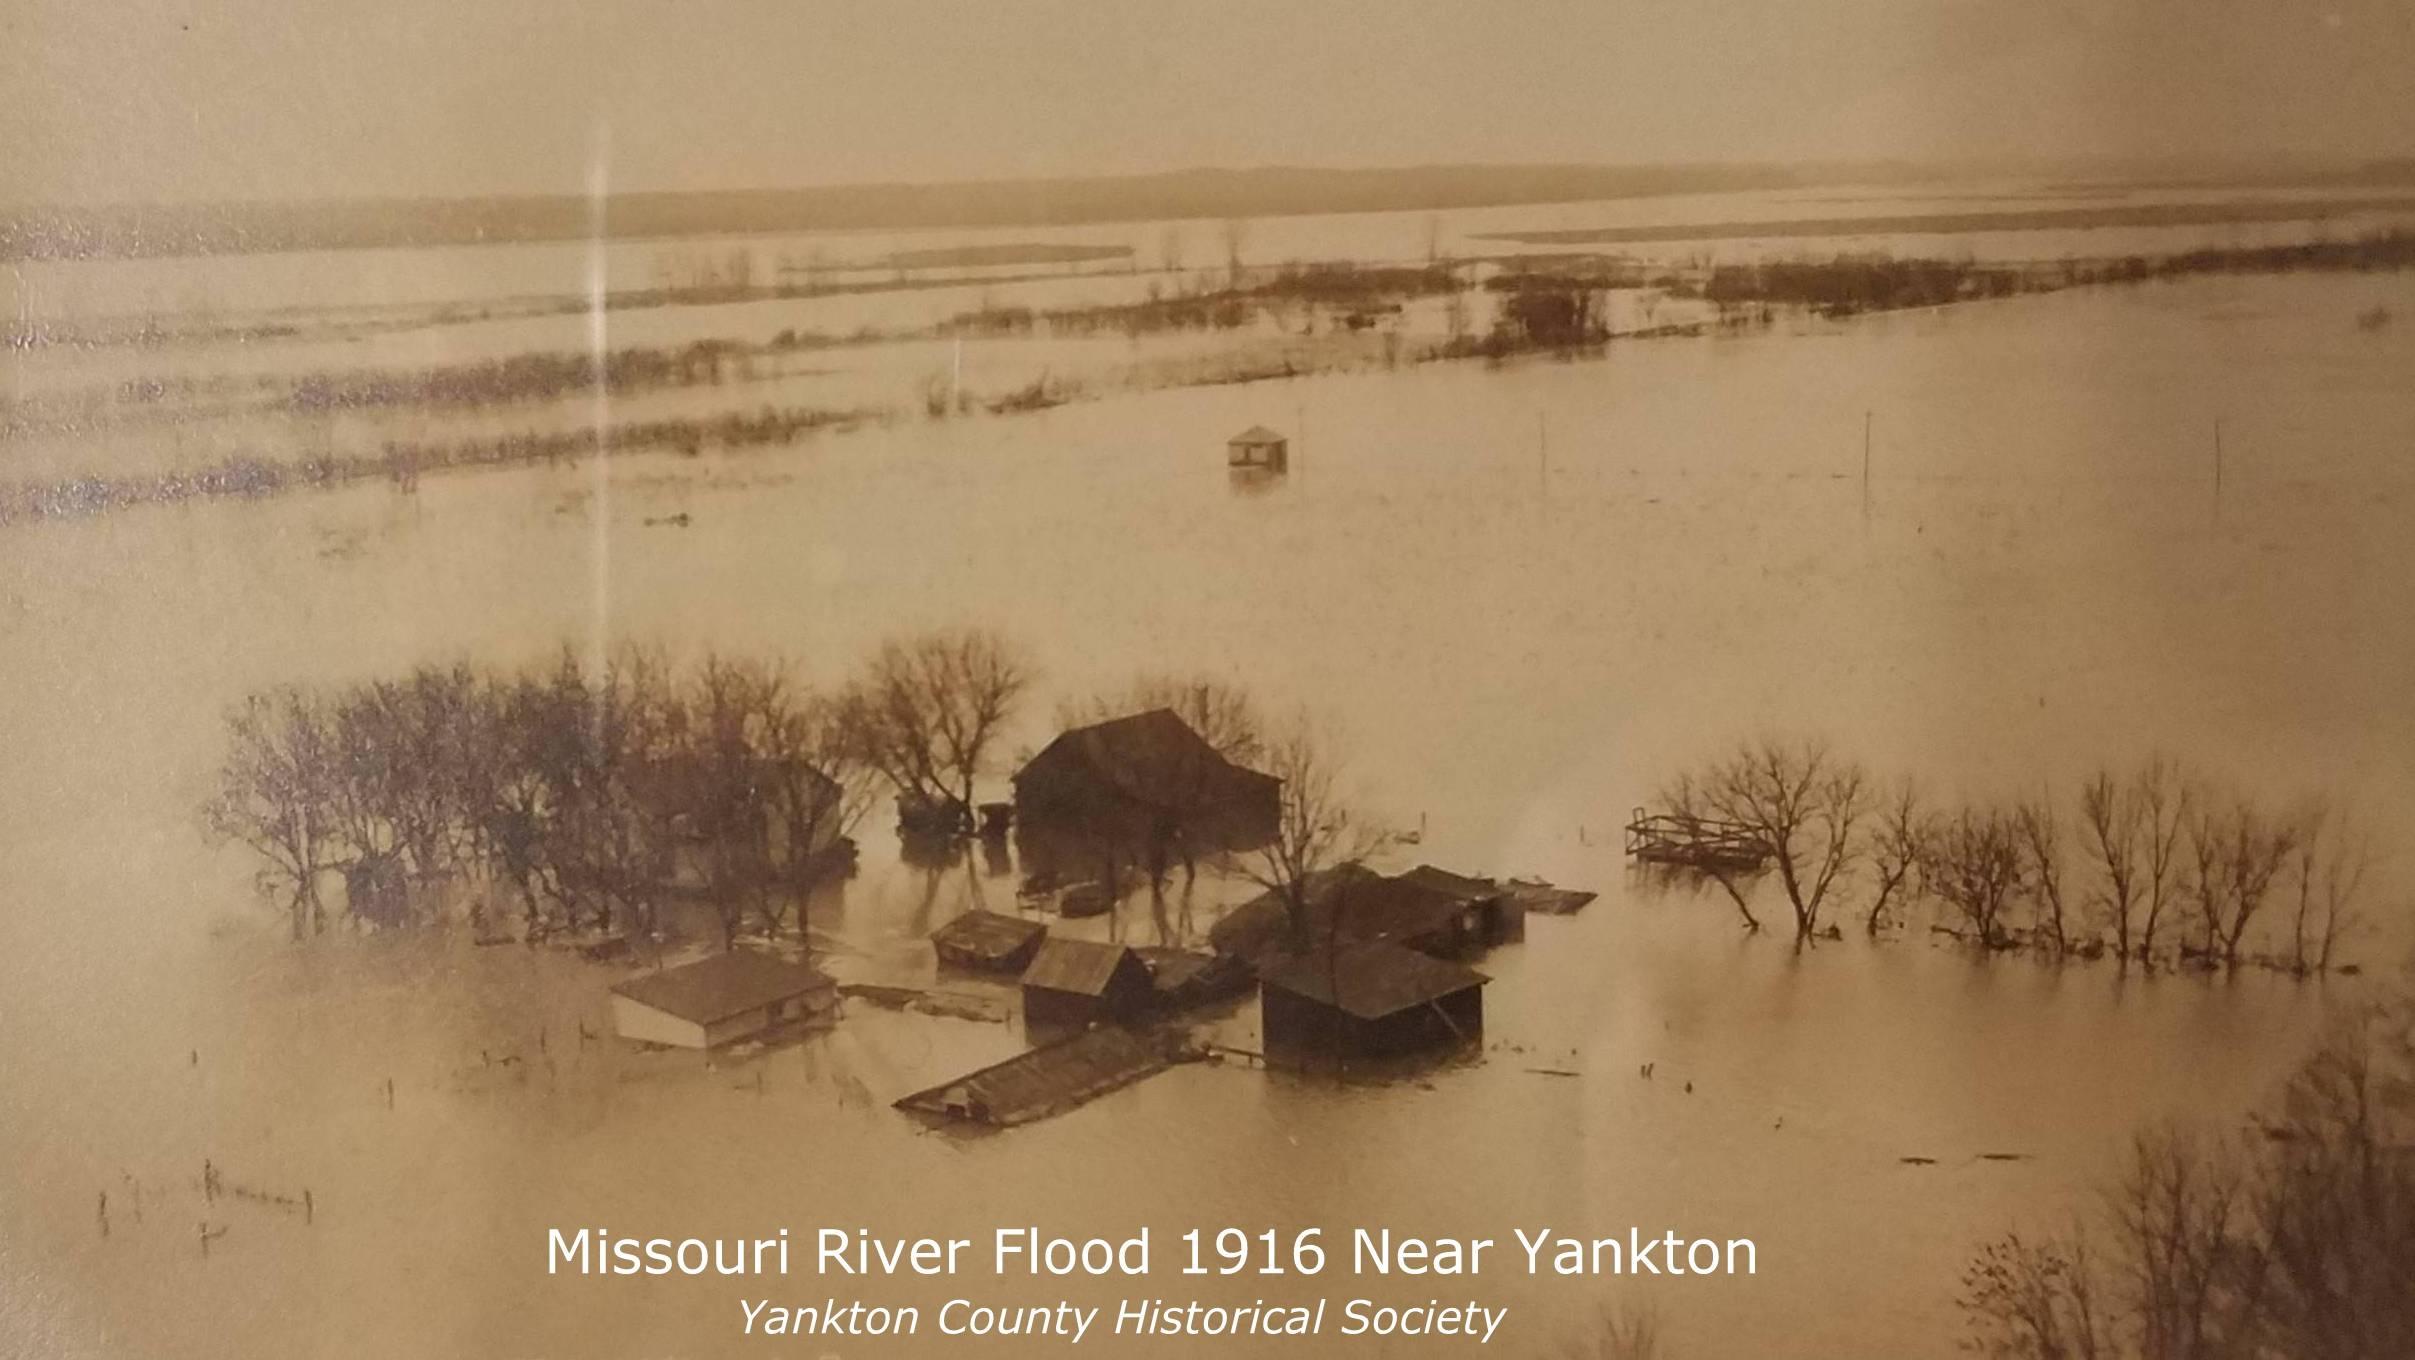 Archival photo of a 1916 flood near Yankton, SD. A farm is shown surrounded by flood water. 